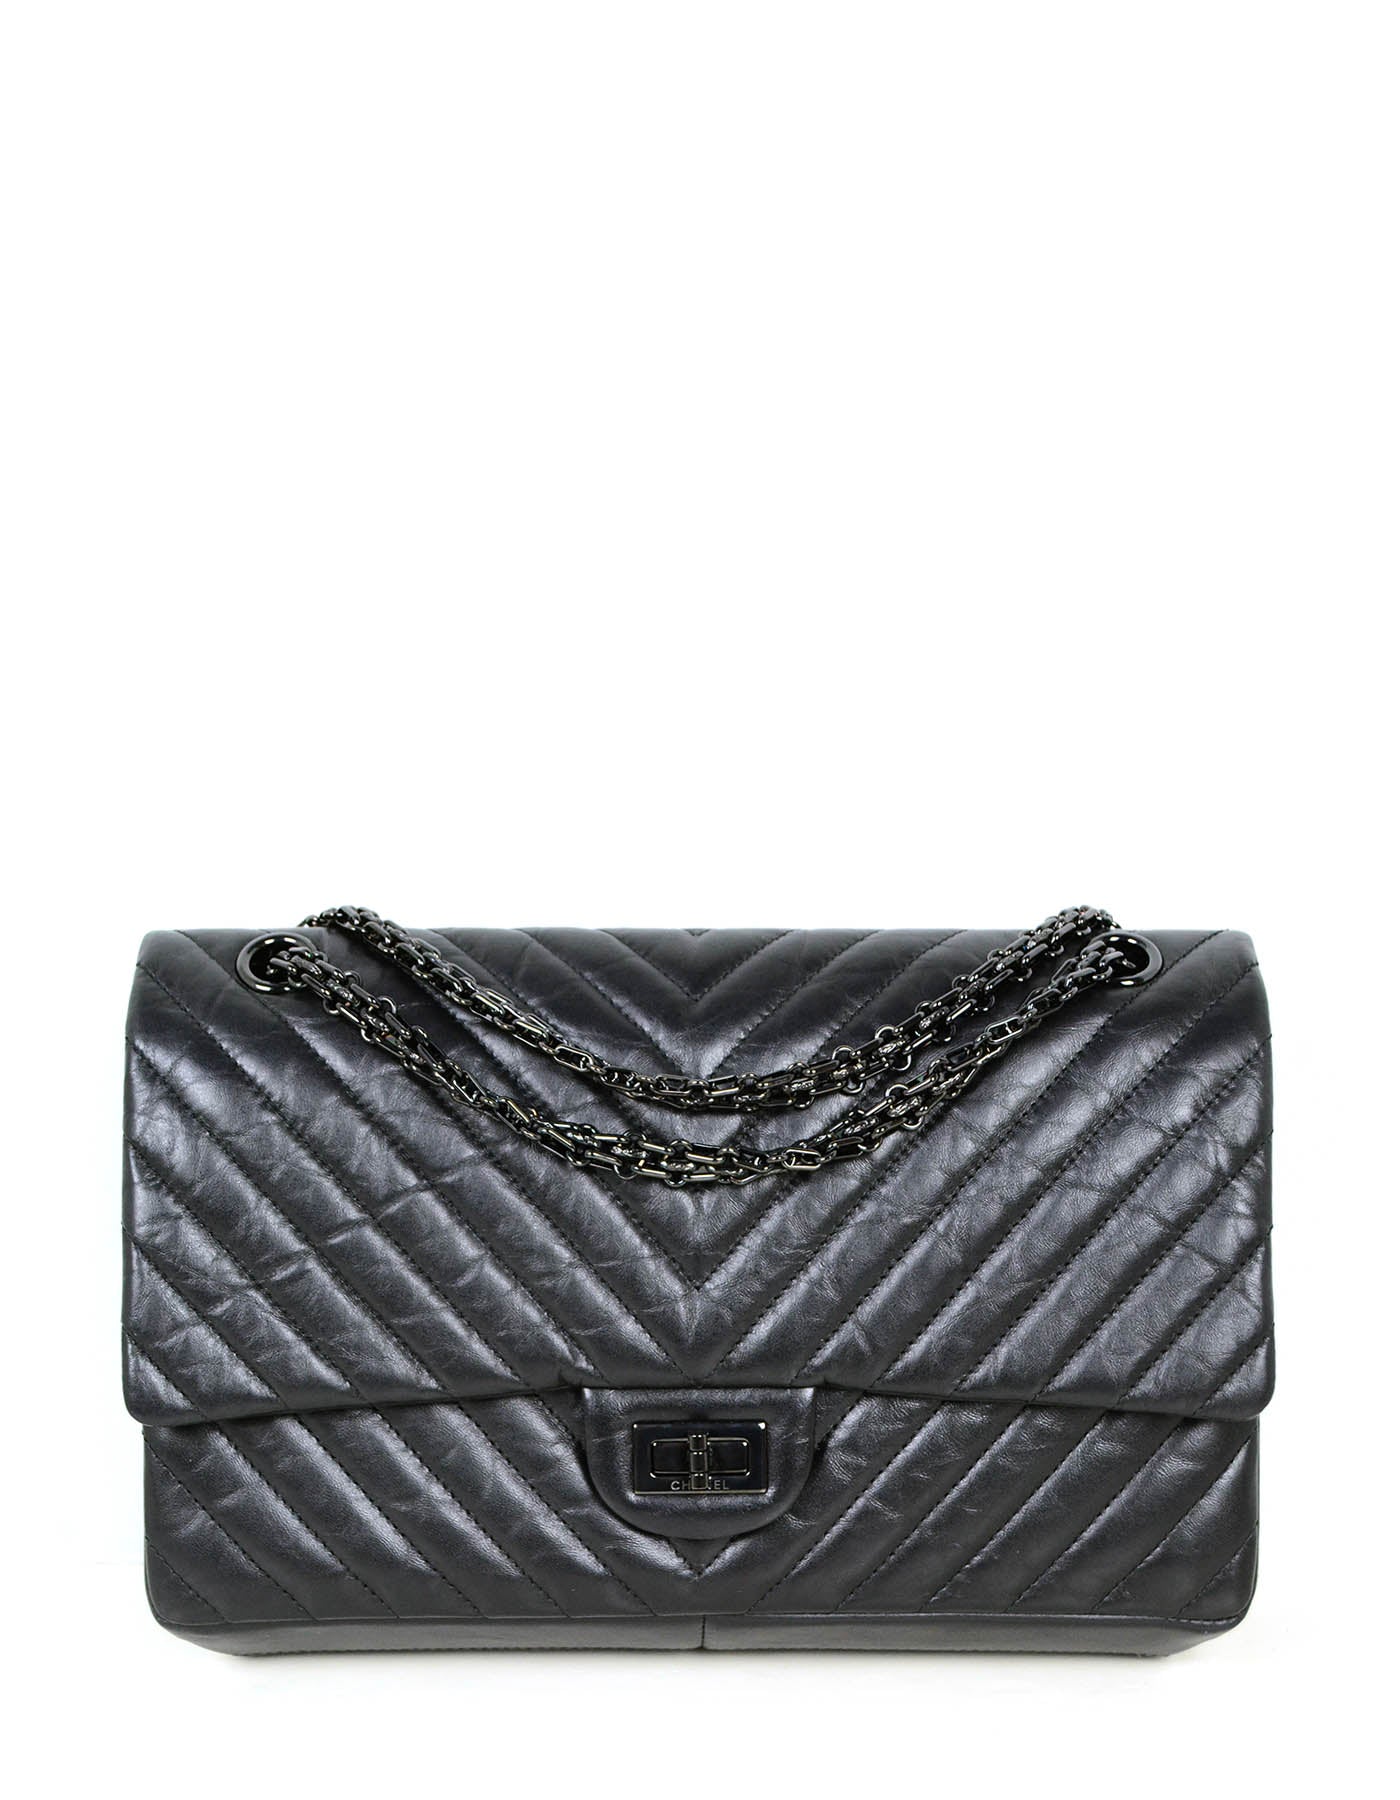 Chanel So Black Calfskin Quilted 2.55 Reissue 226 Flap Bag – ASC